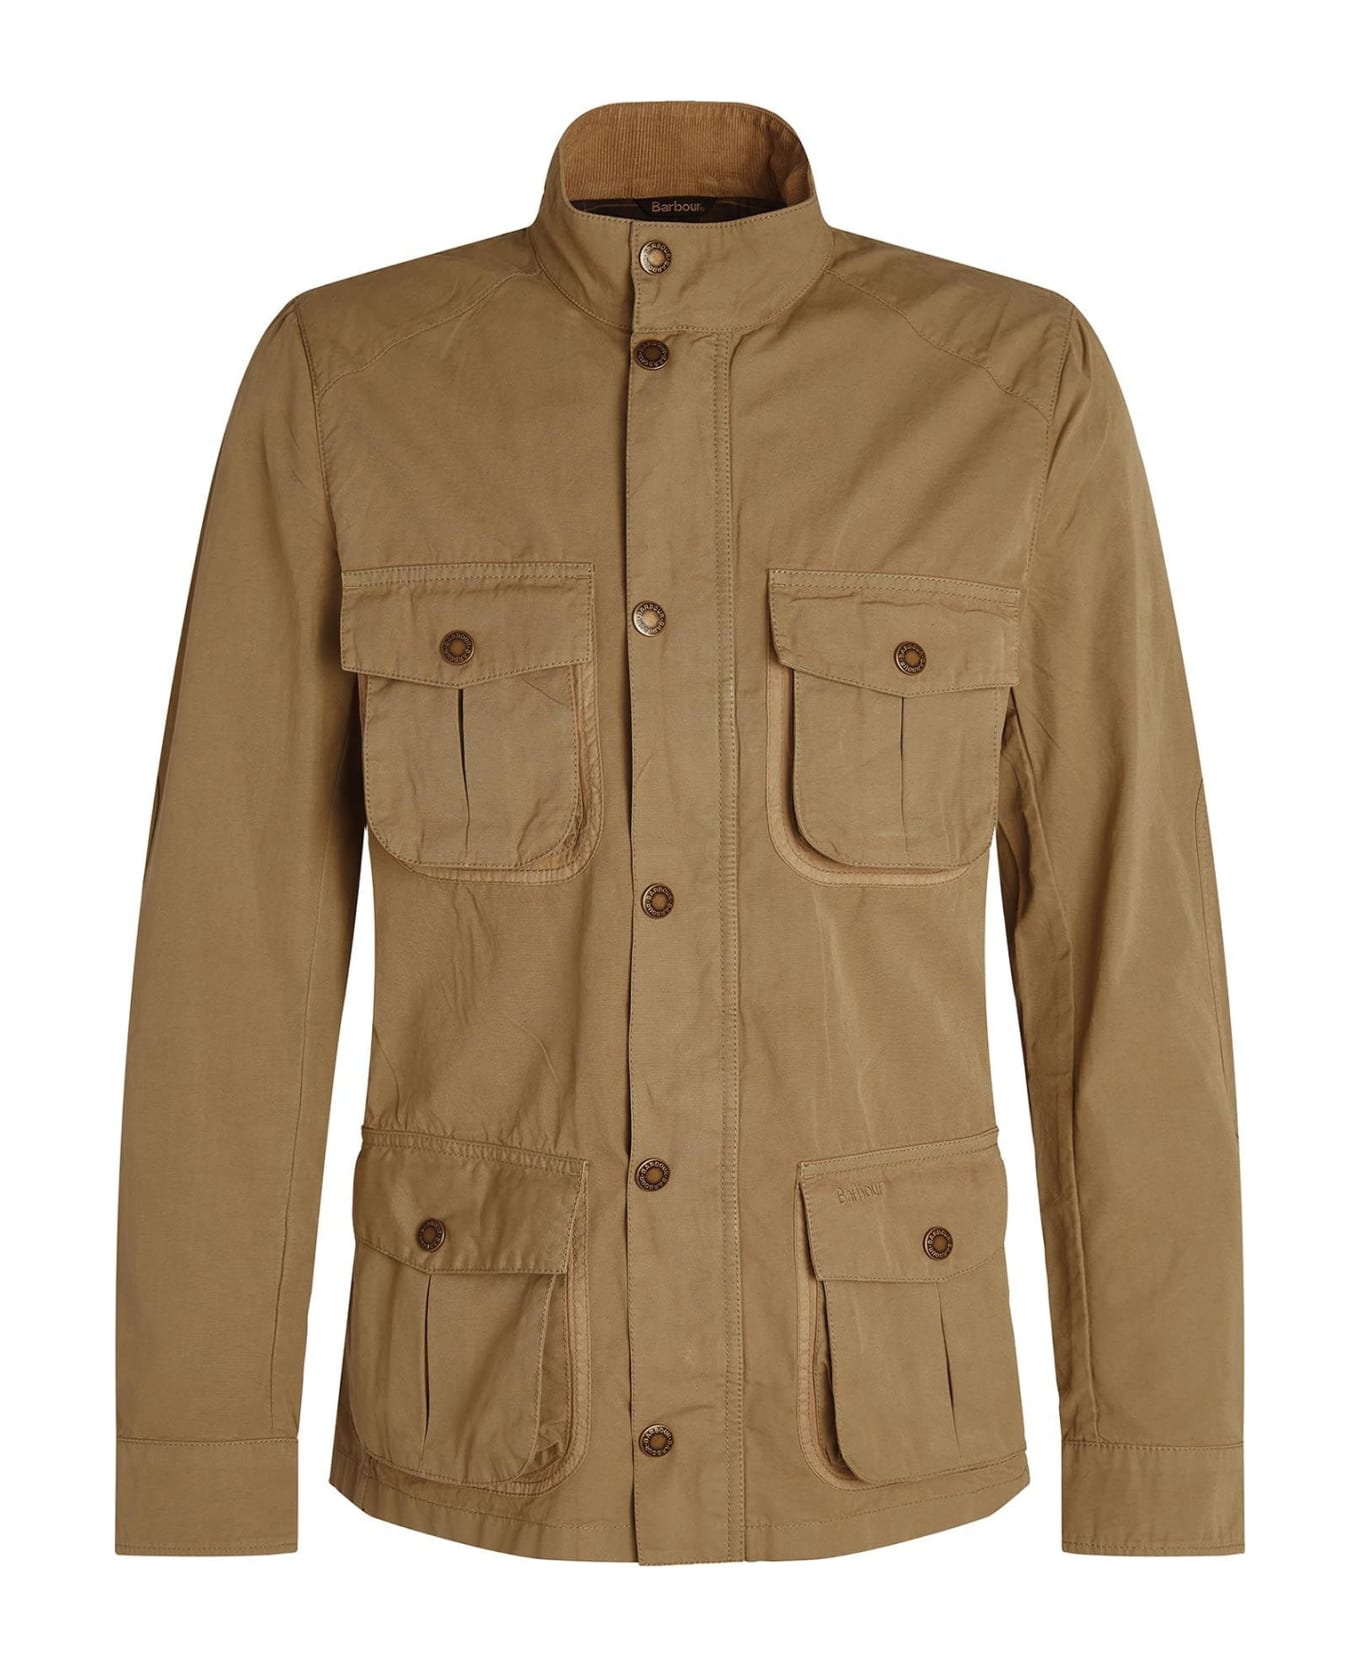 Barbour Jacket With Buttons And Pockets - BLEACHED OLIVE